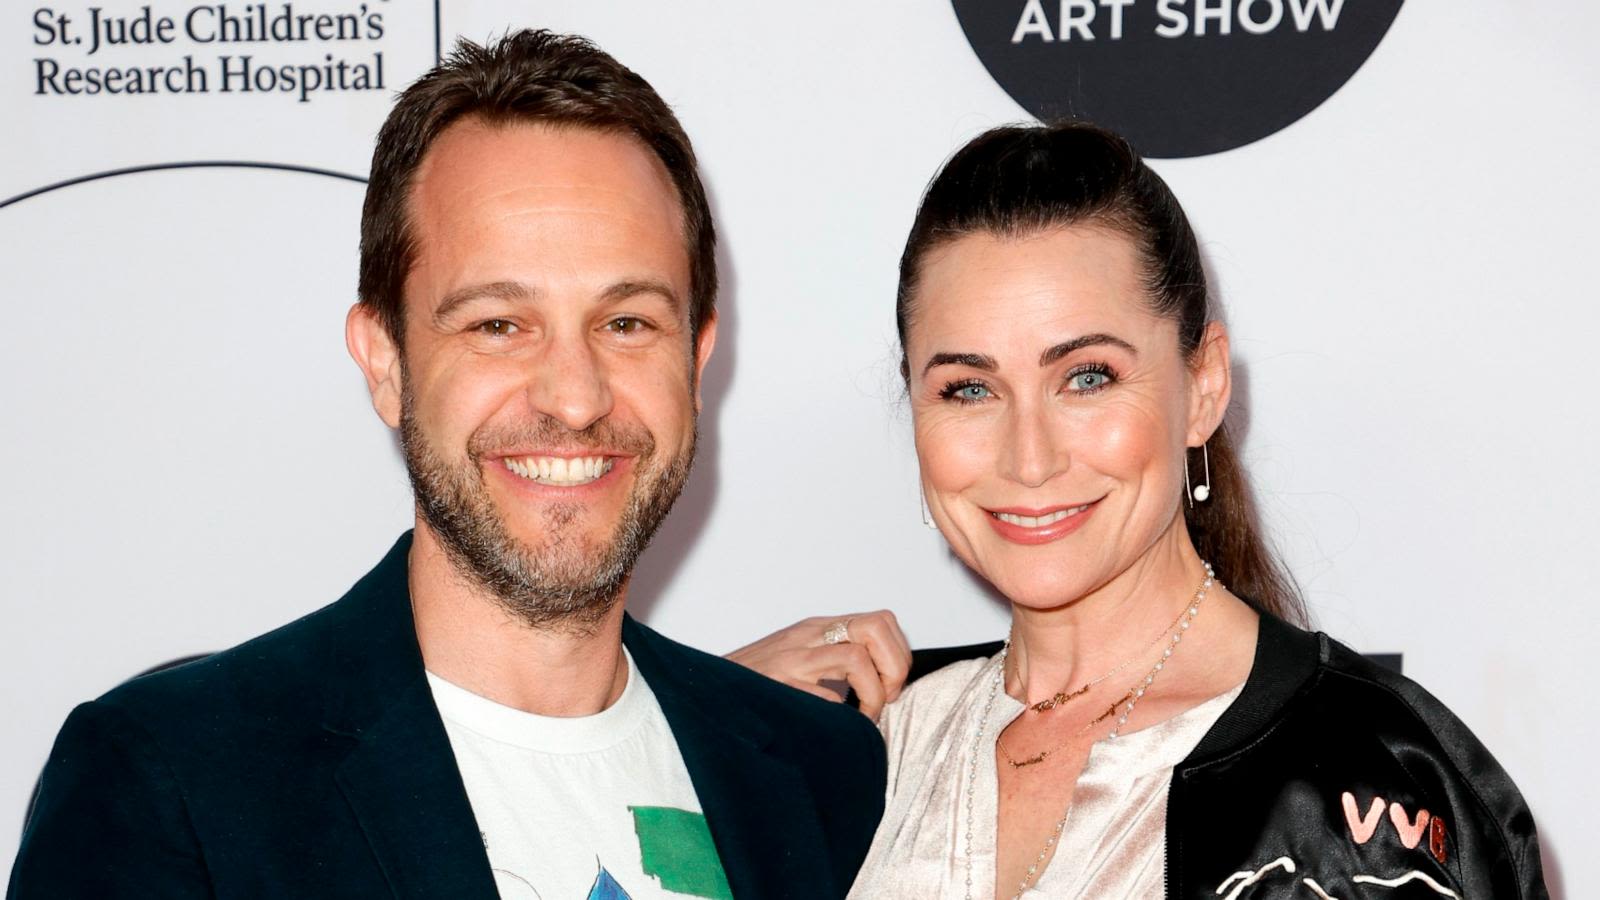 Soap star Rena Sofer shares what led to remarrying husband 7 years after their divorce